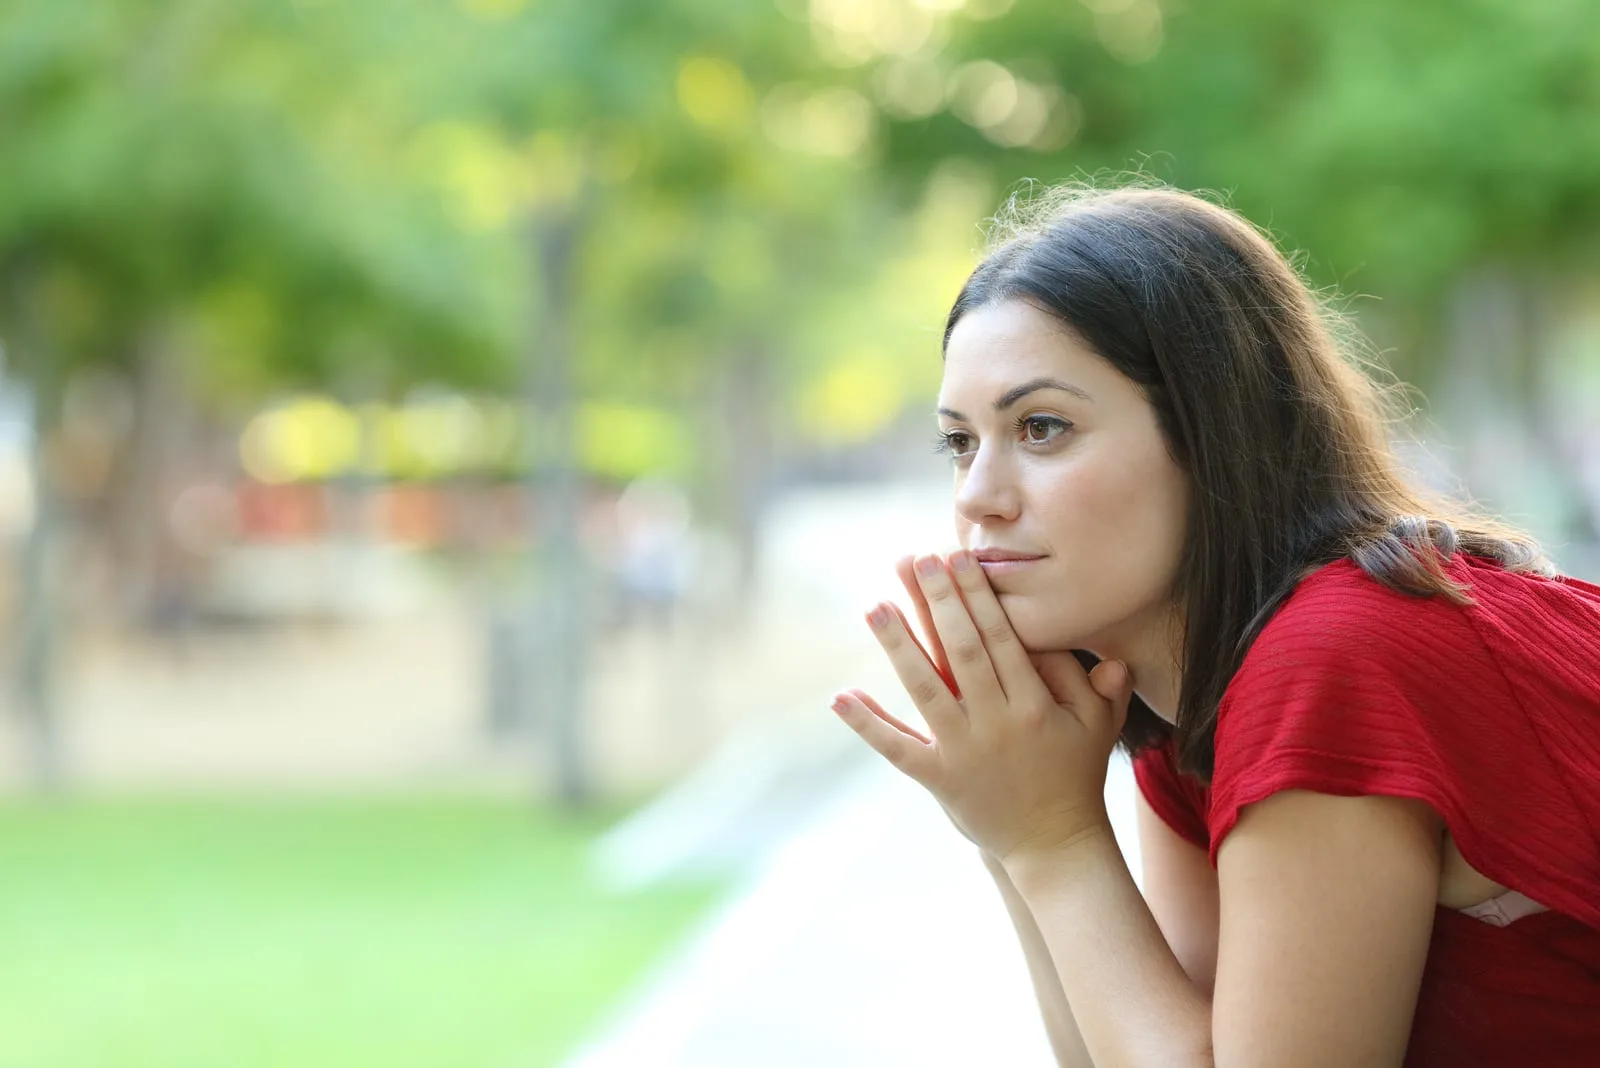 pensive woman sitting on a bench in a park